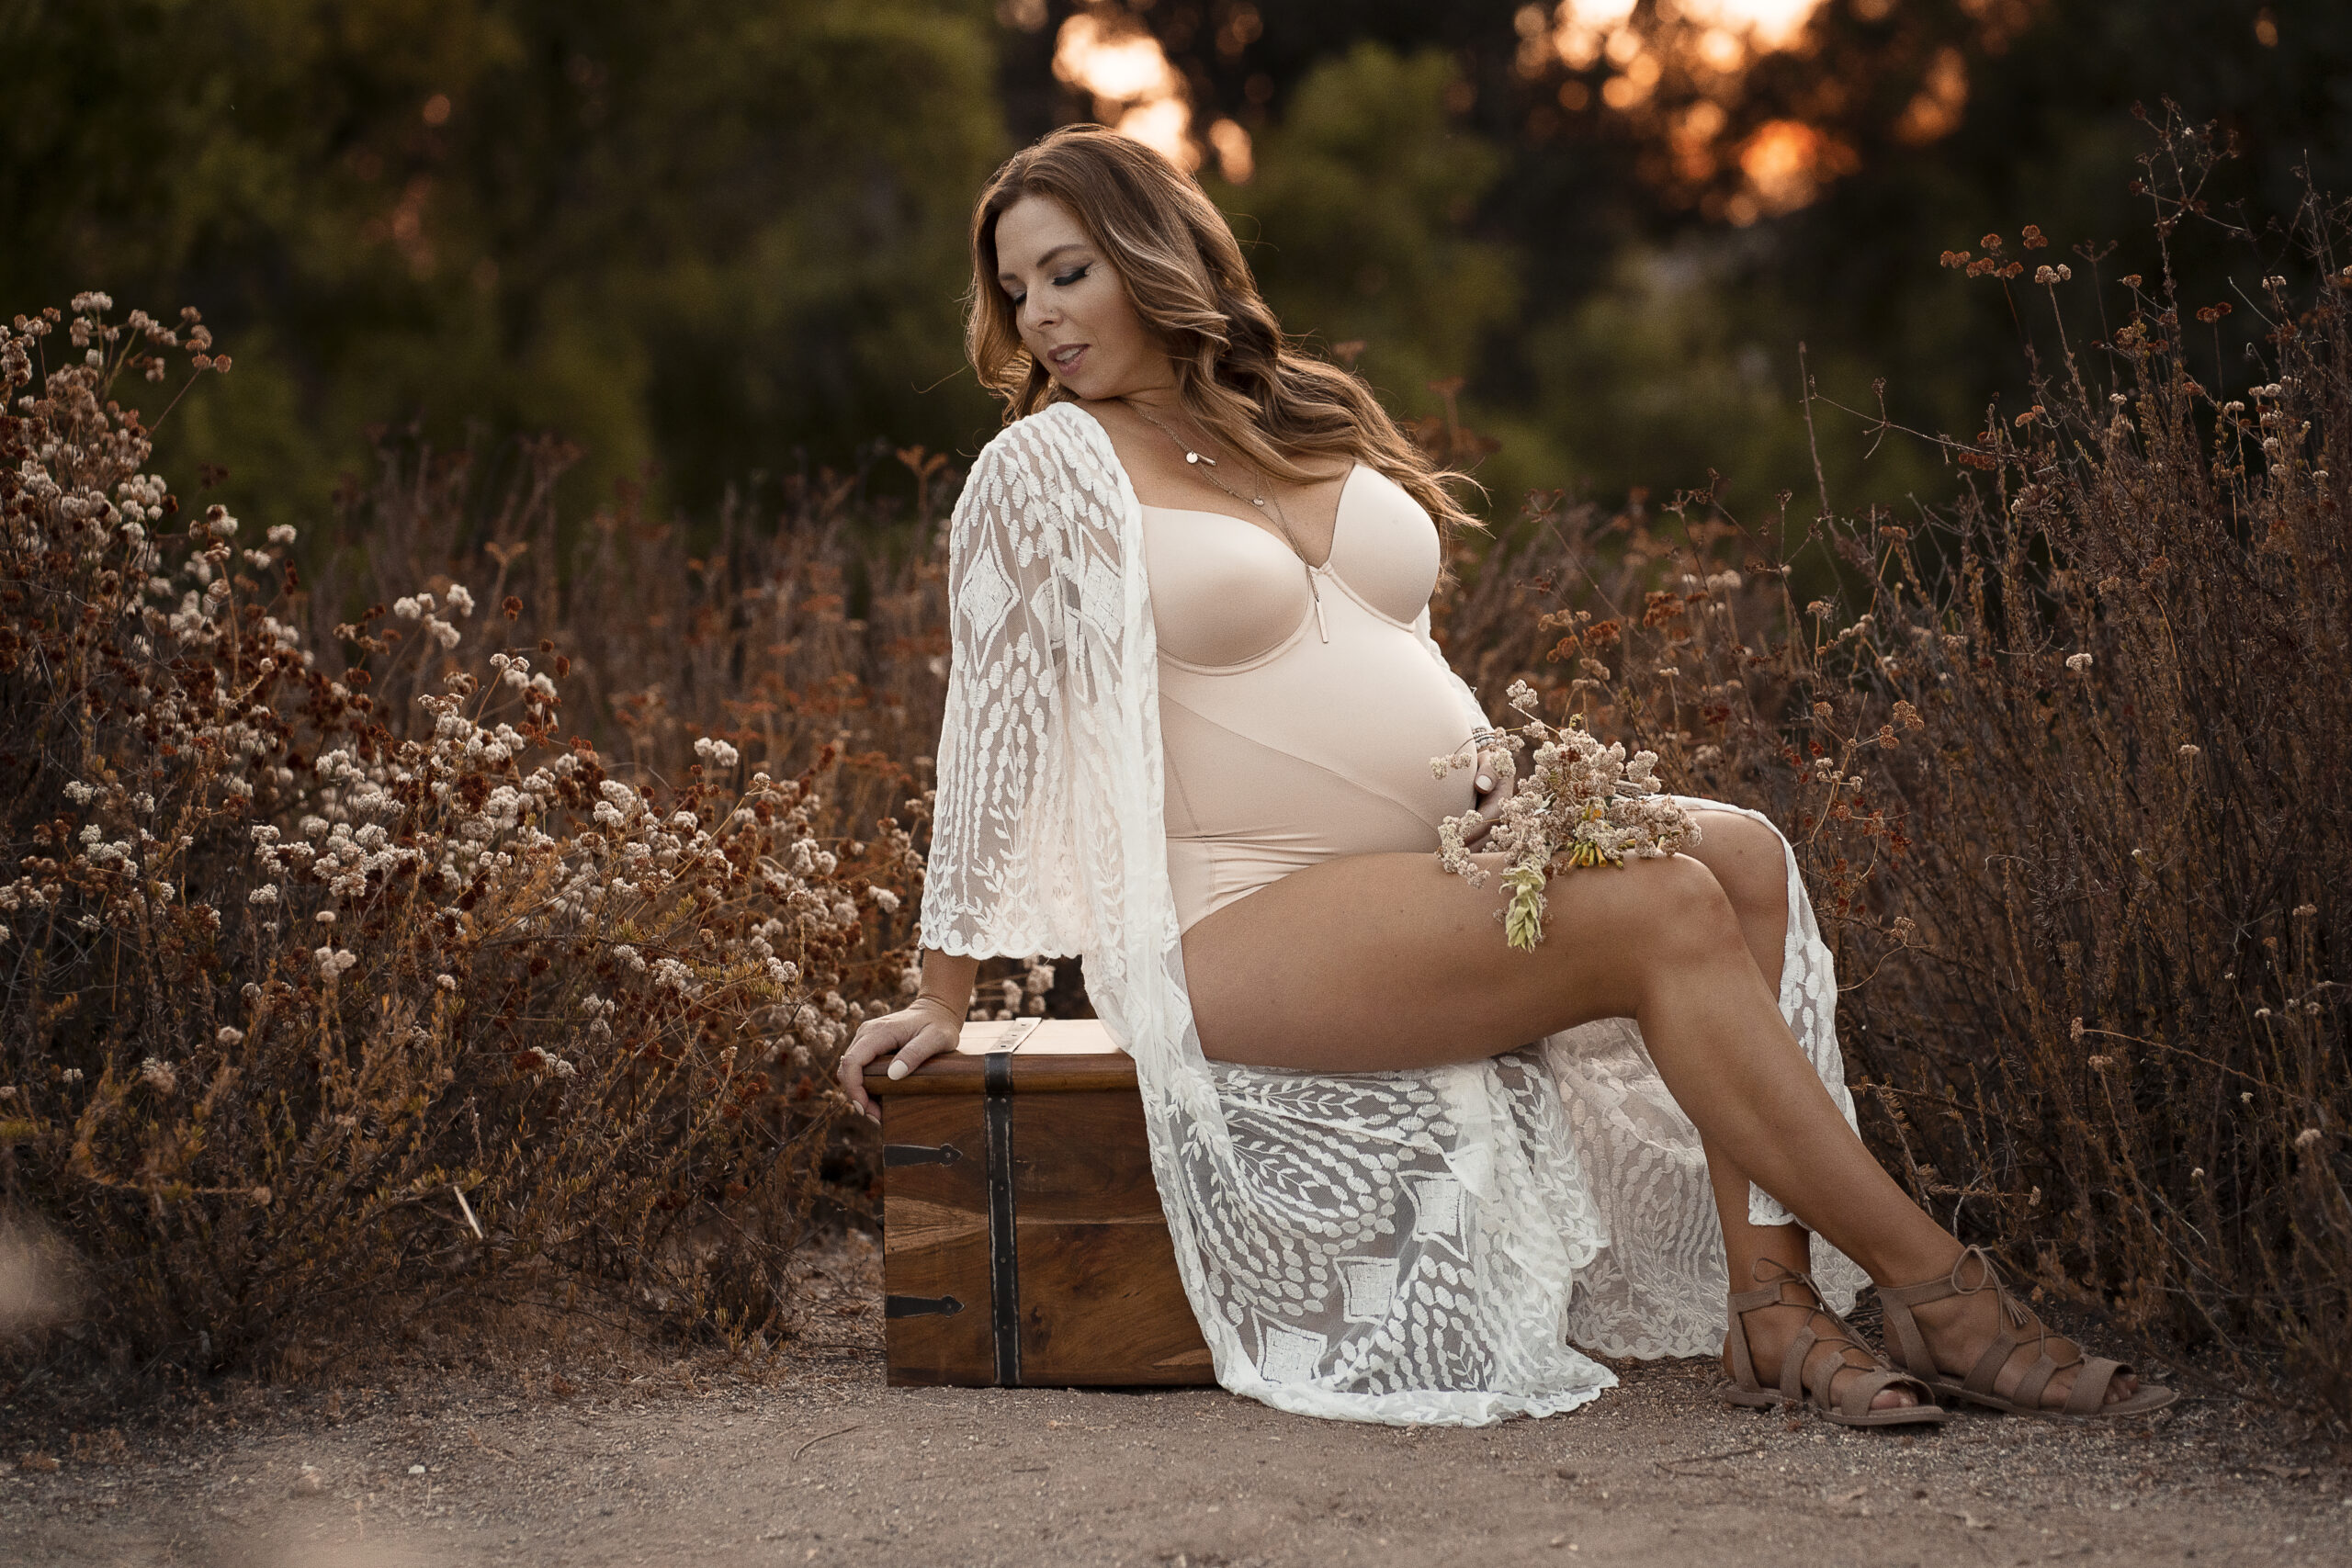 Pregnant woman sits on a wooden trunk in a field full of brown and white flowers while wearing lingerie as she poses for her maternity photo session